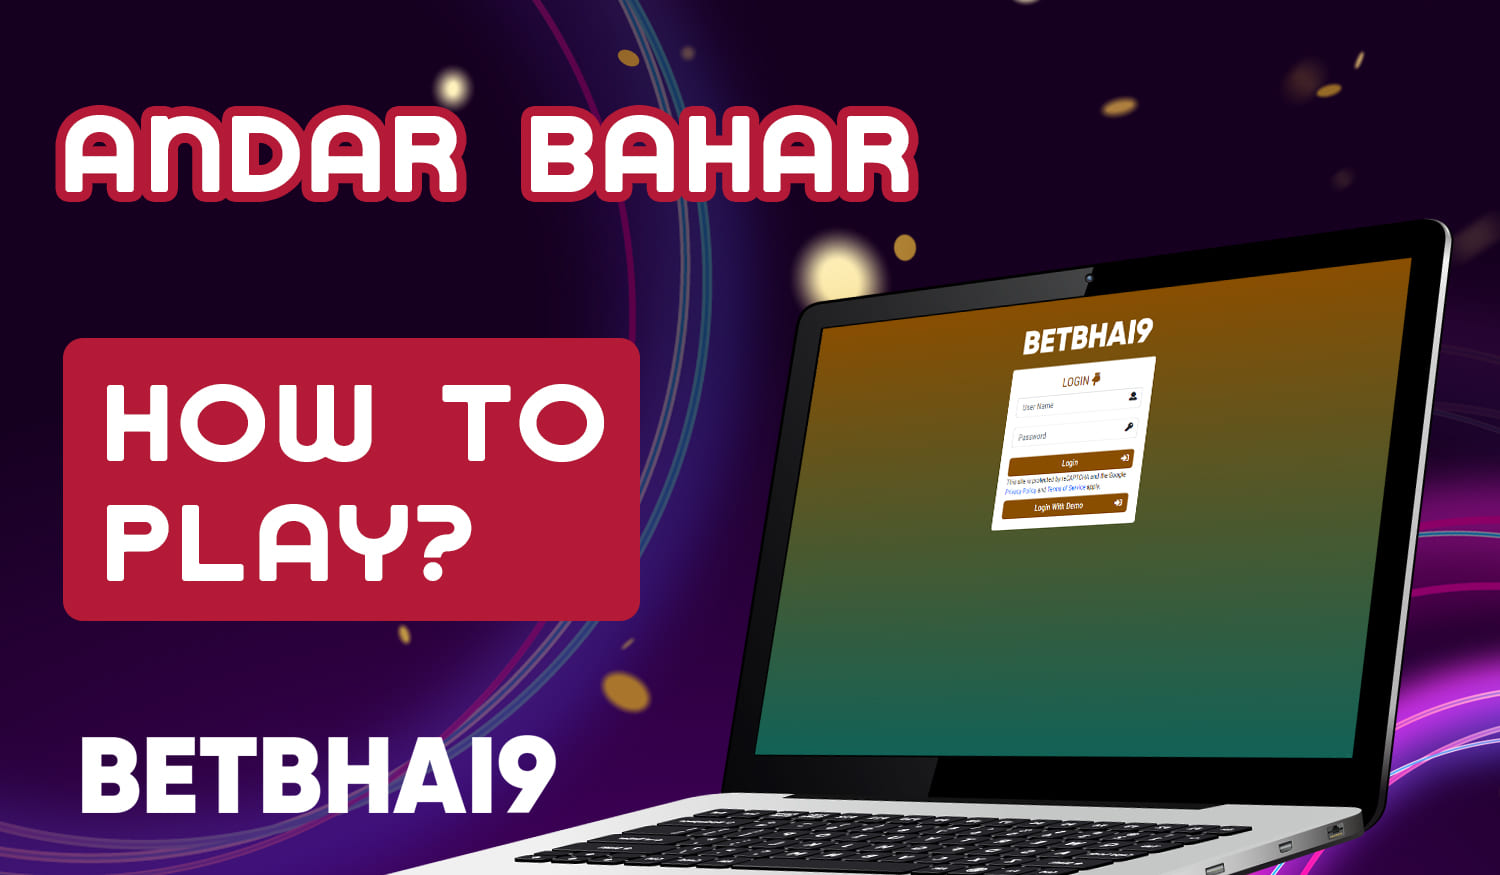 How Indian users can start playing Andar Bahar at Betbhai9